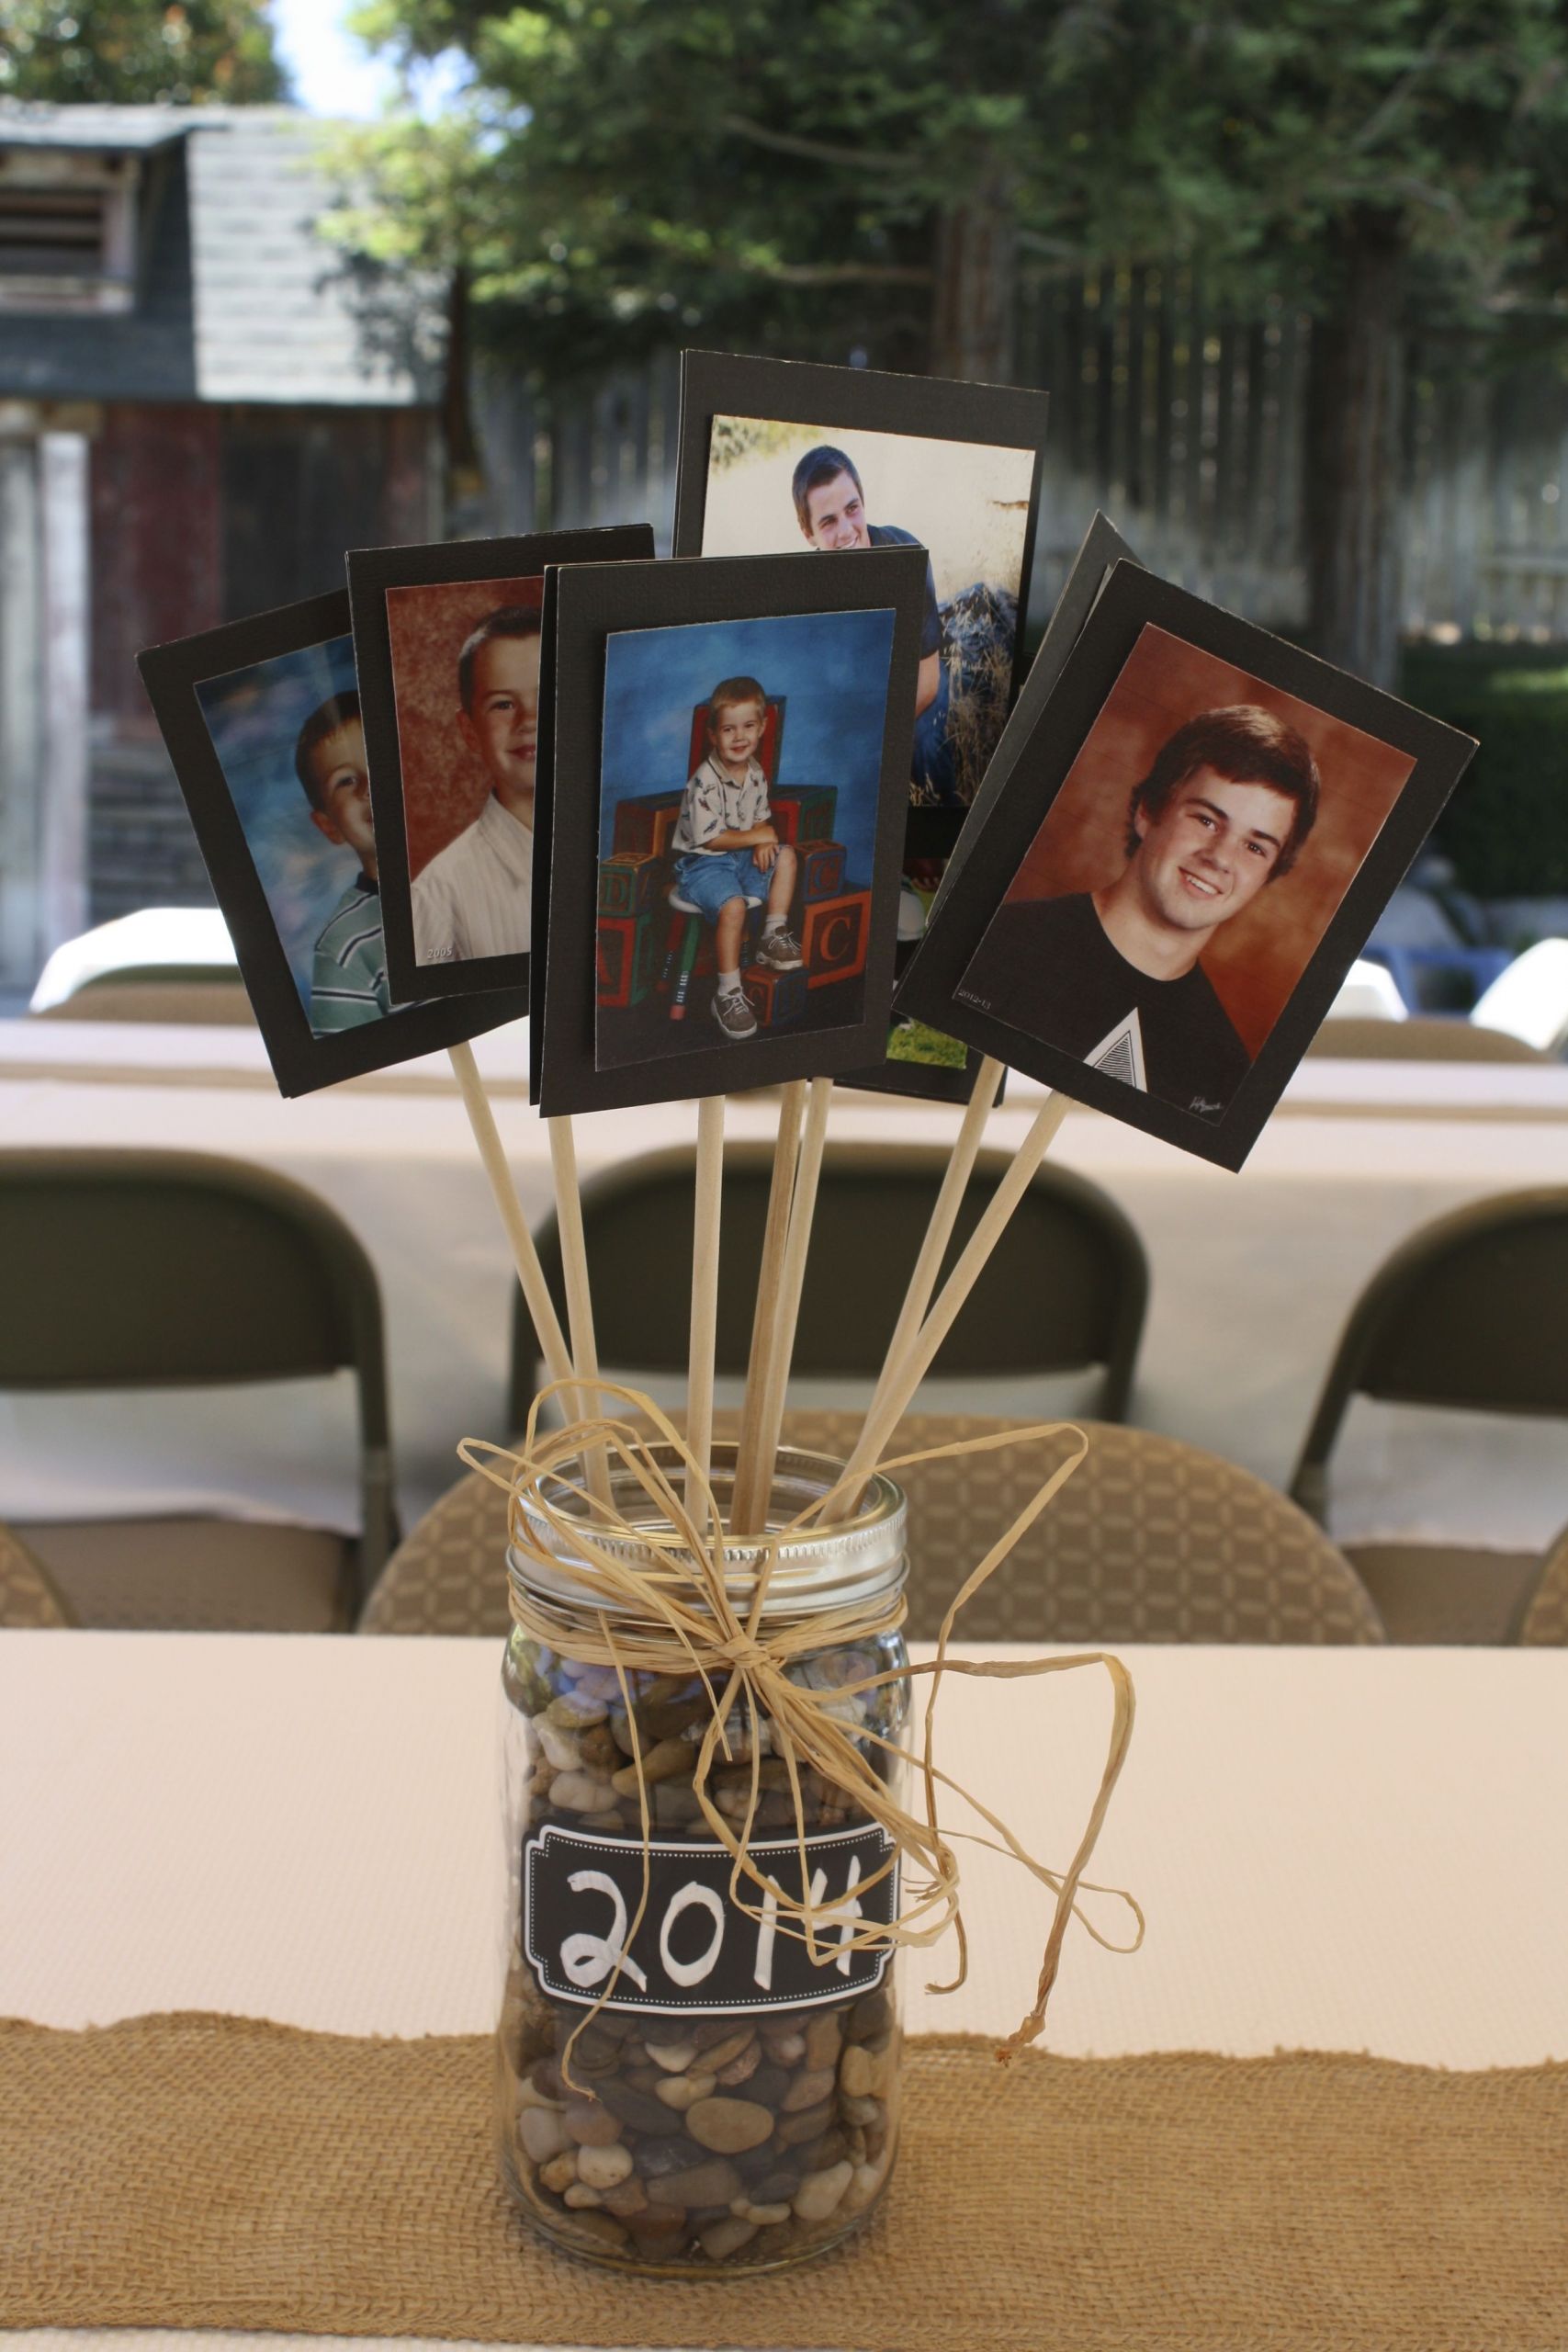 High School Graduation Party Ideas For Guys
 Centerpiece for tables at a graduation party Good for